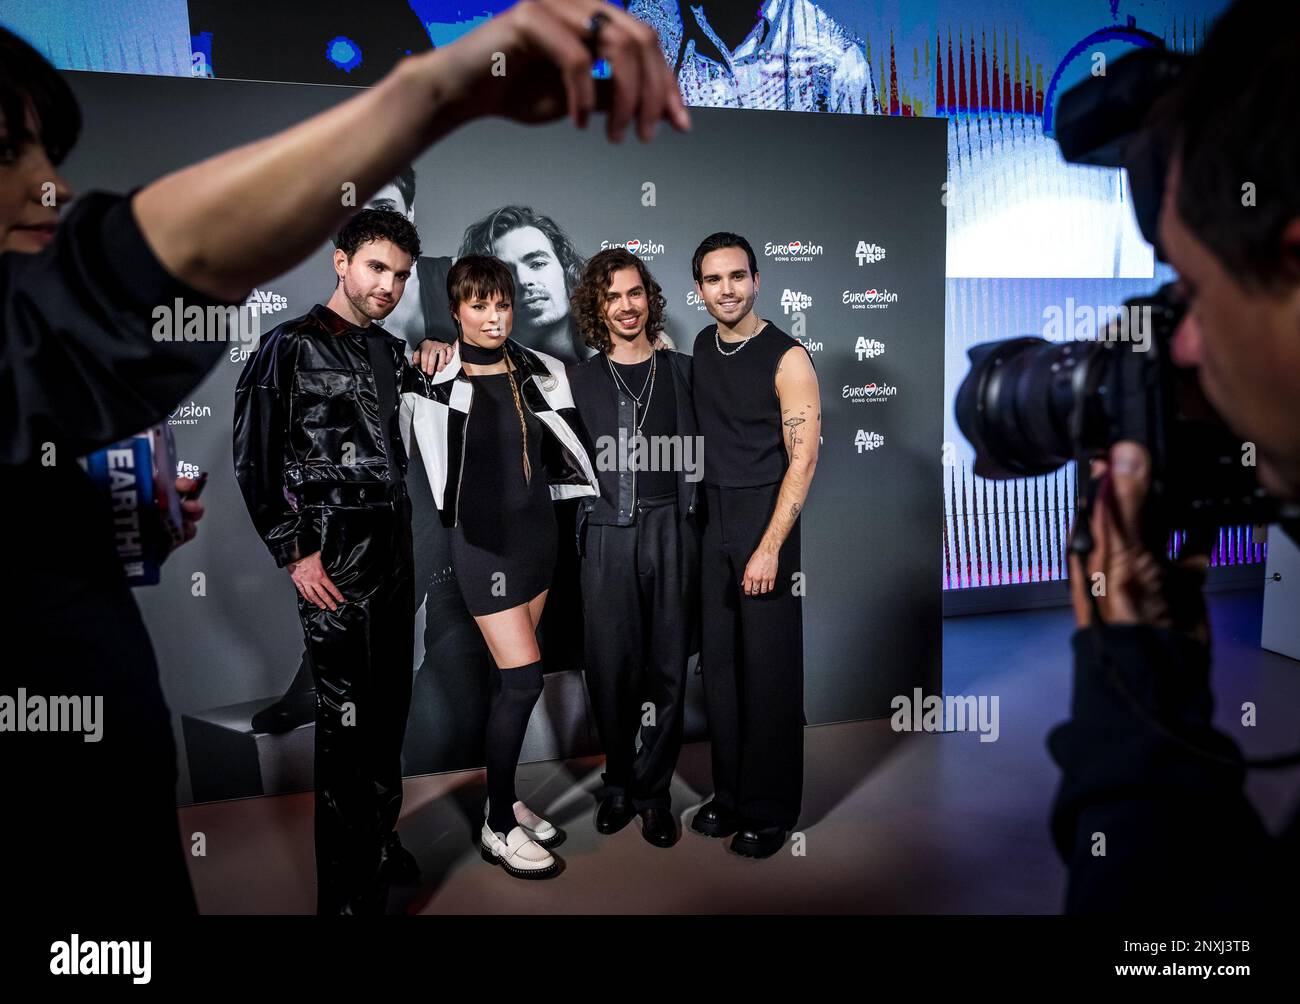 ROTTERDAM - The Dutch song festival duo Mia & Dion together with producers  Duncan Laurence and his partner Jordan Garfield during the presentation of  the song for the Eurovision Song Contest in